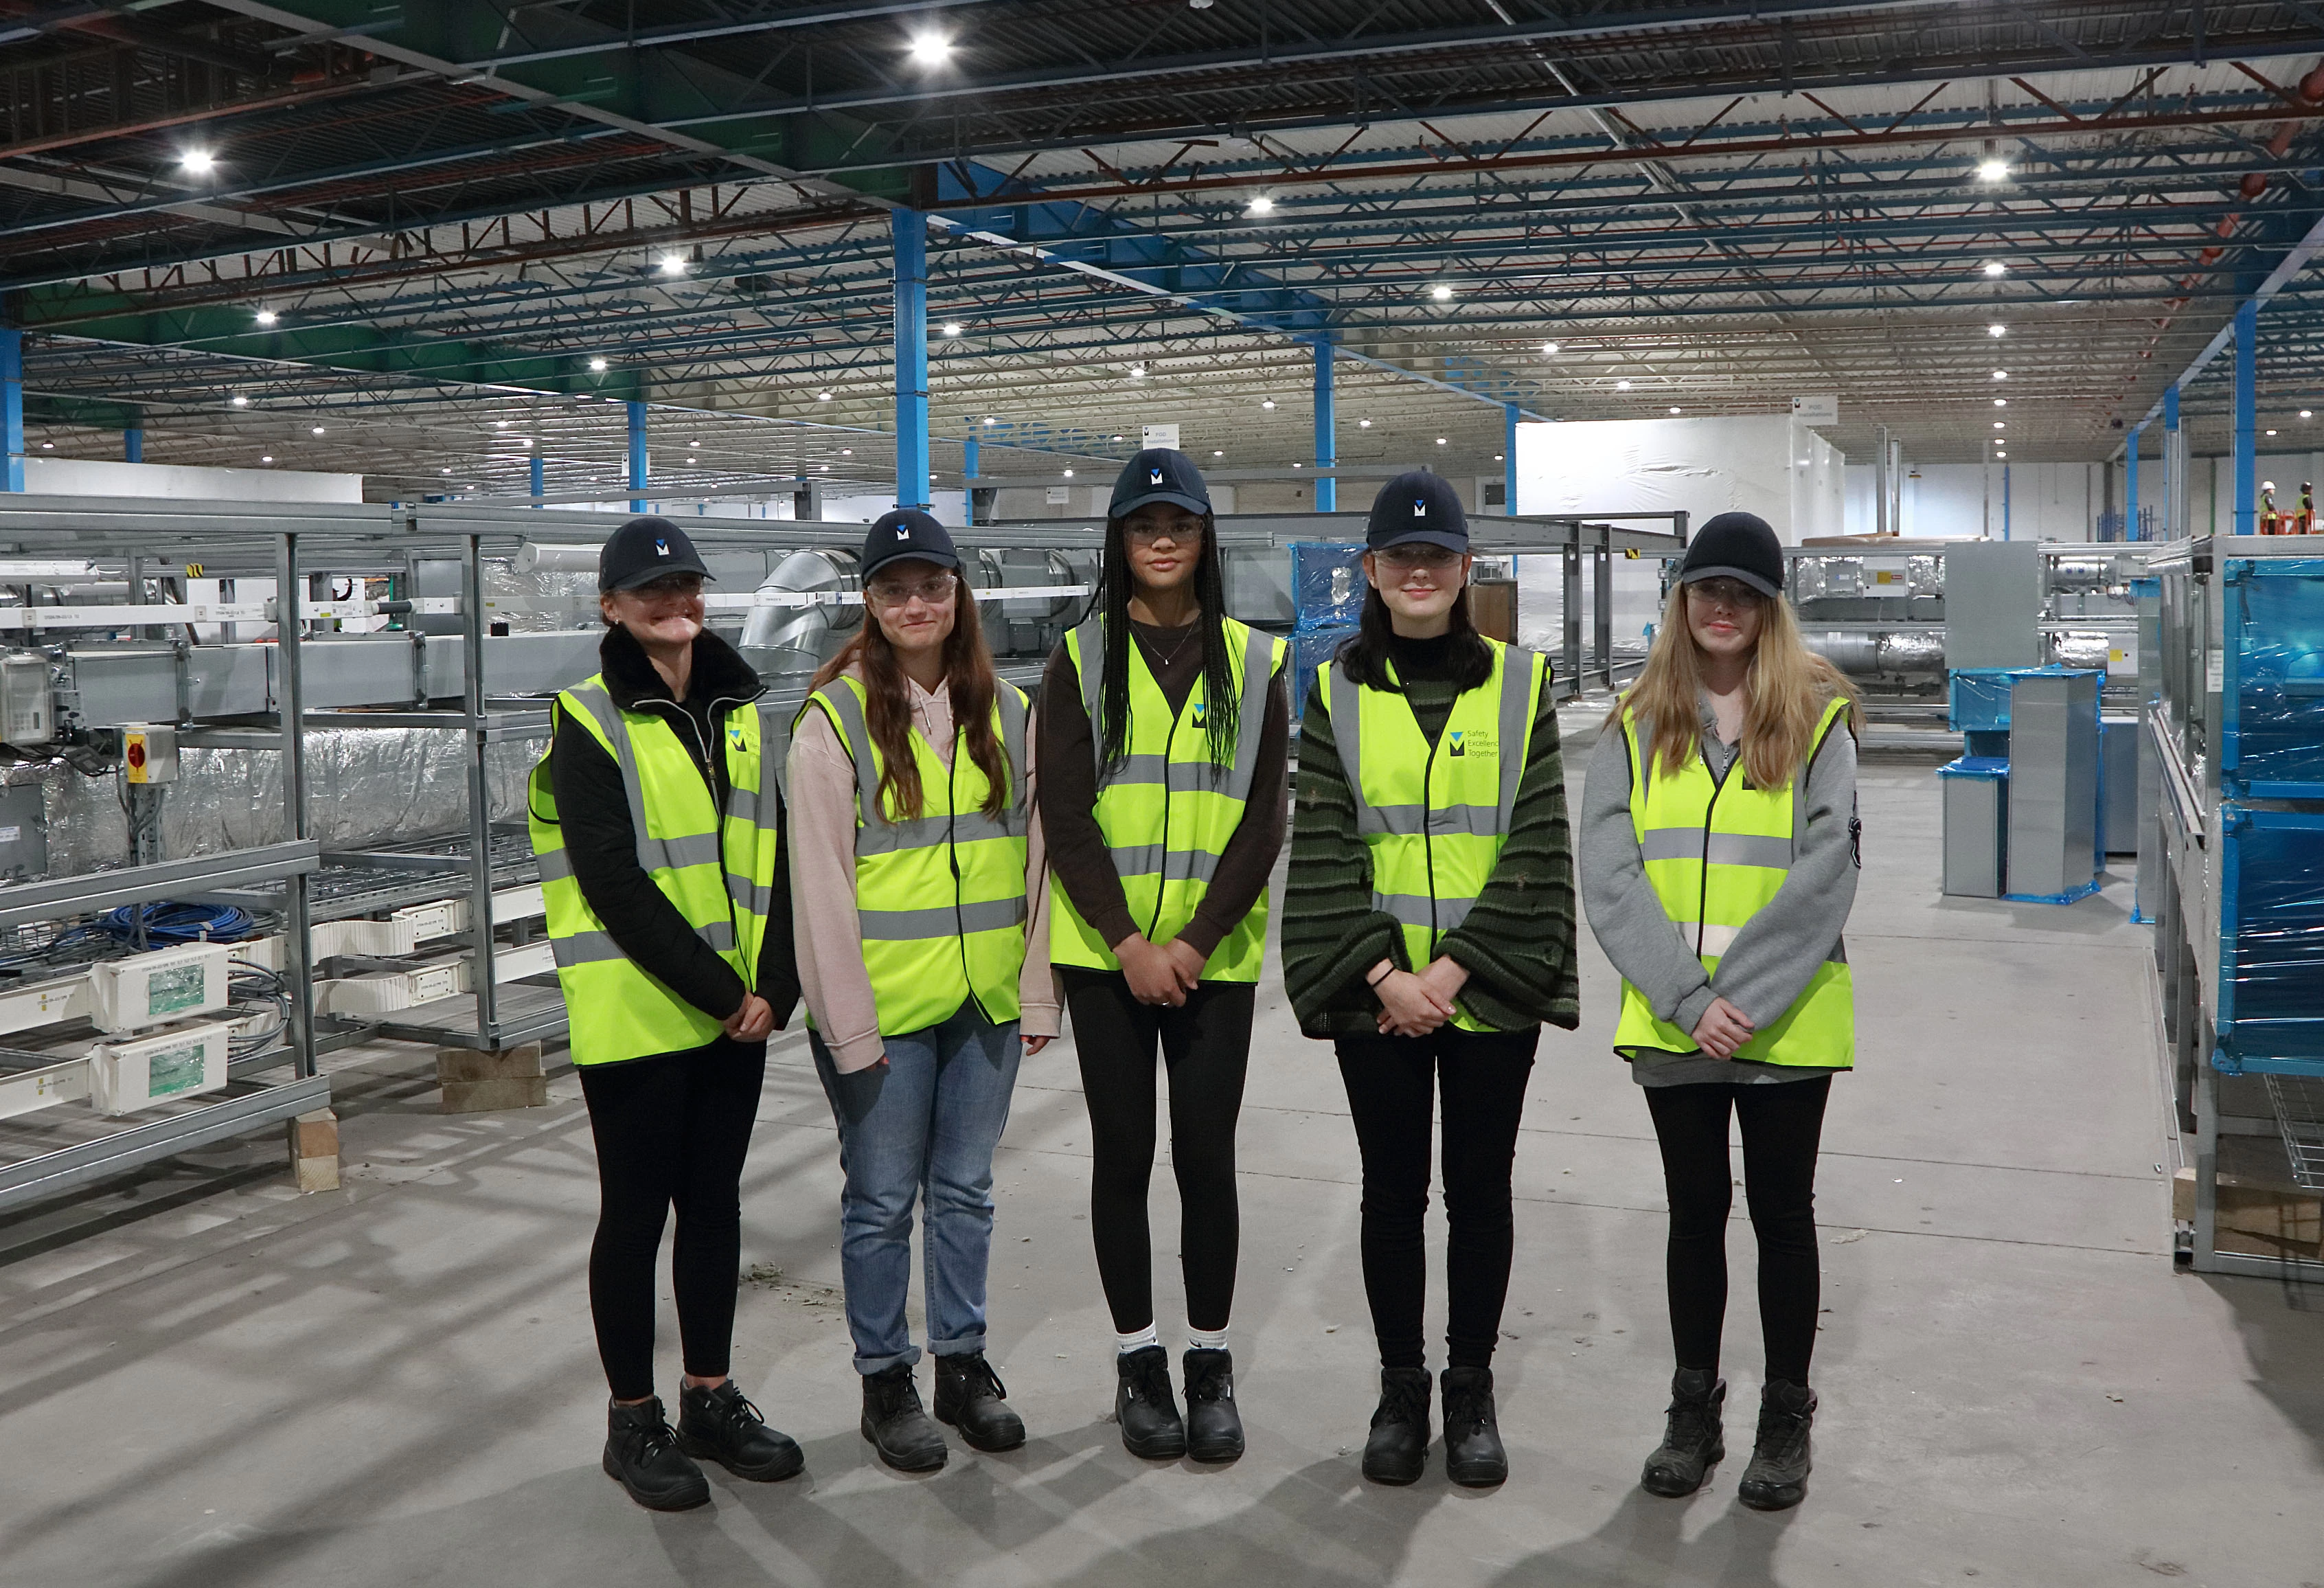 Merit's new engineering apprentices - left to right - Sophie Orrick, Molly Giles, Emily Anderson, Katie Priest and Jasmine Henson